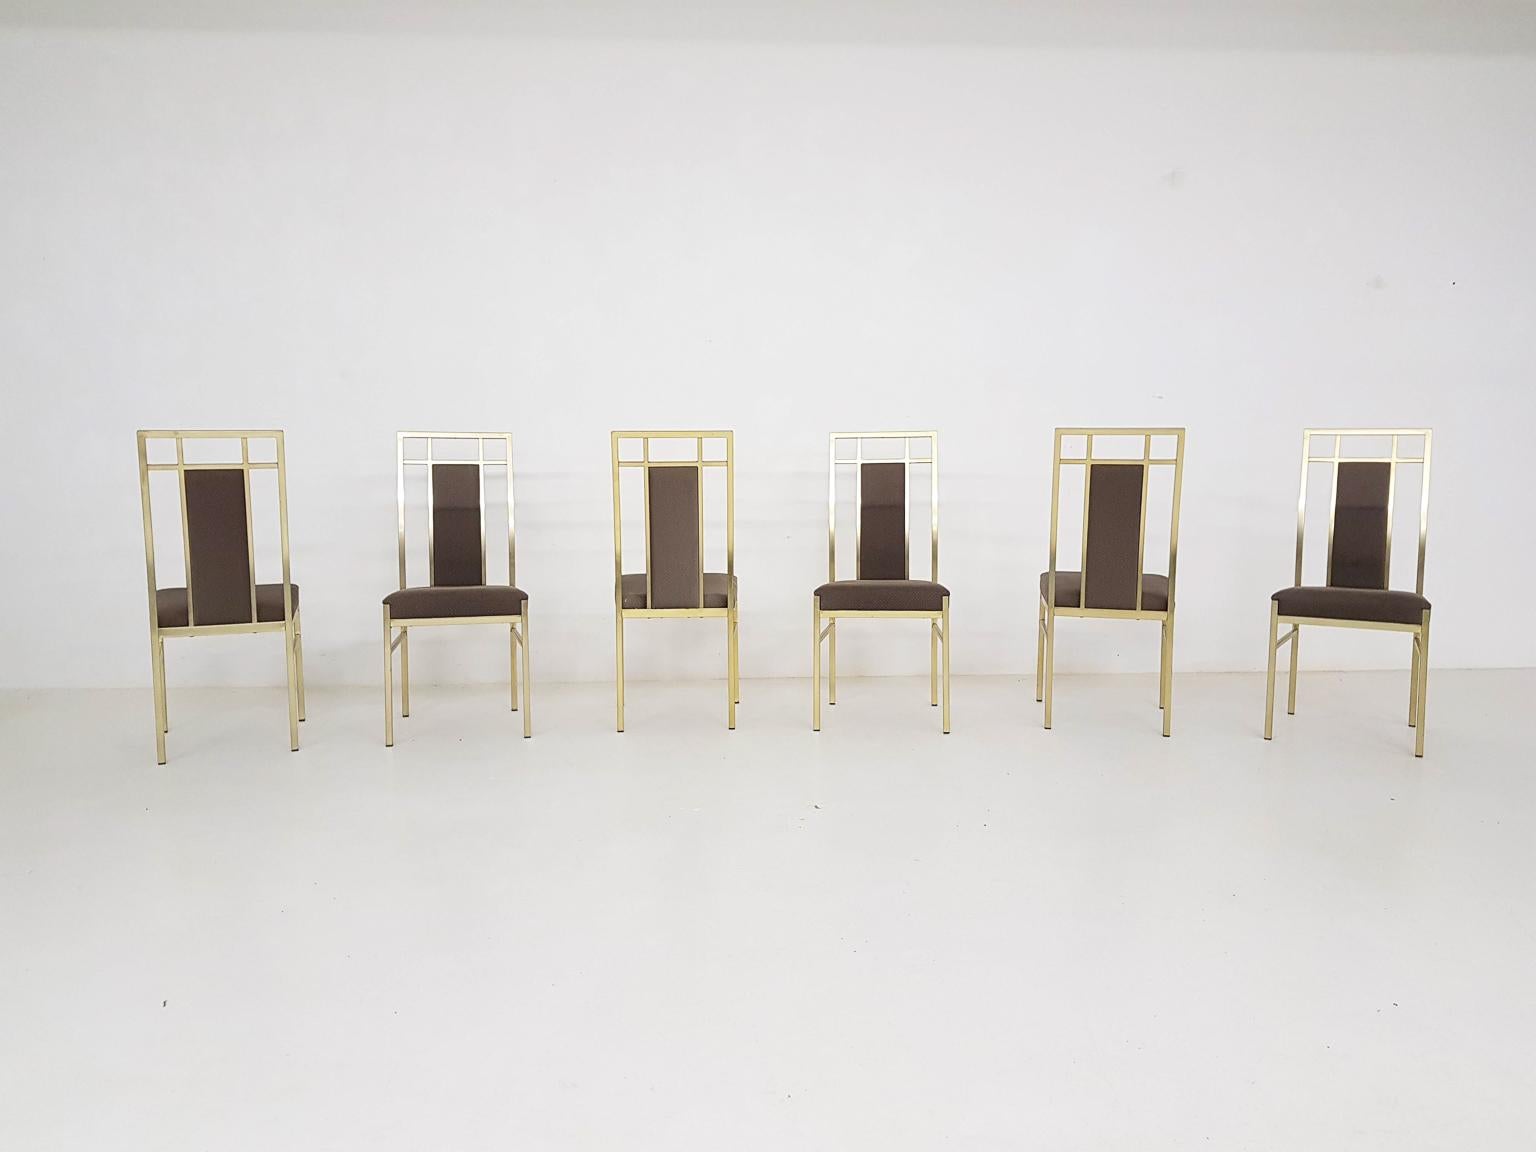 Powder-Coated Set of 6 Hollywood Regency Dining Chairs, Italy, 1970s For Sale